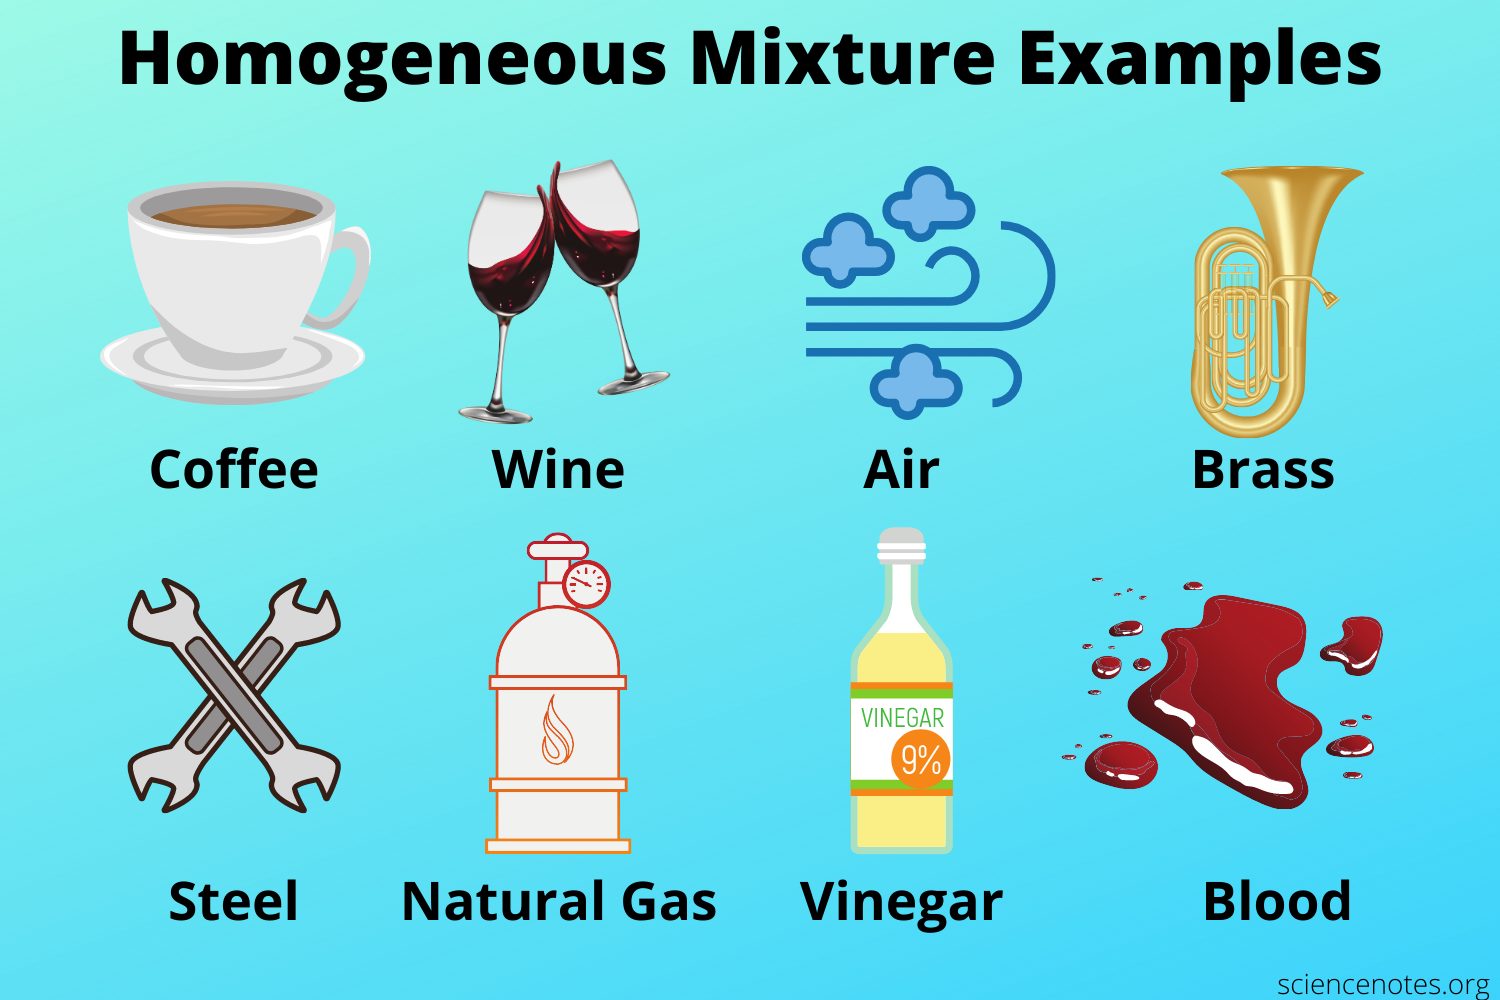 What are Homogeneous Mixtures